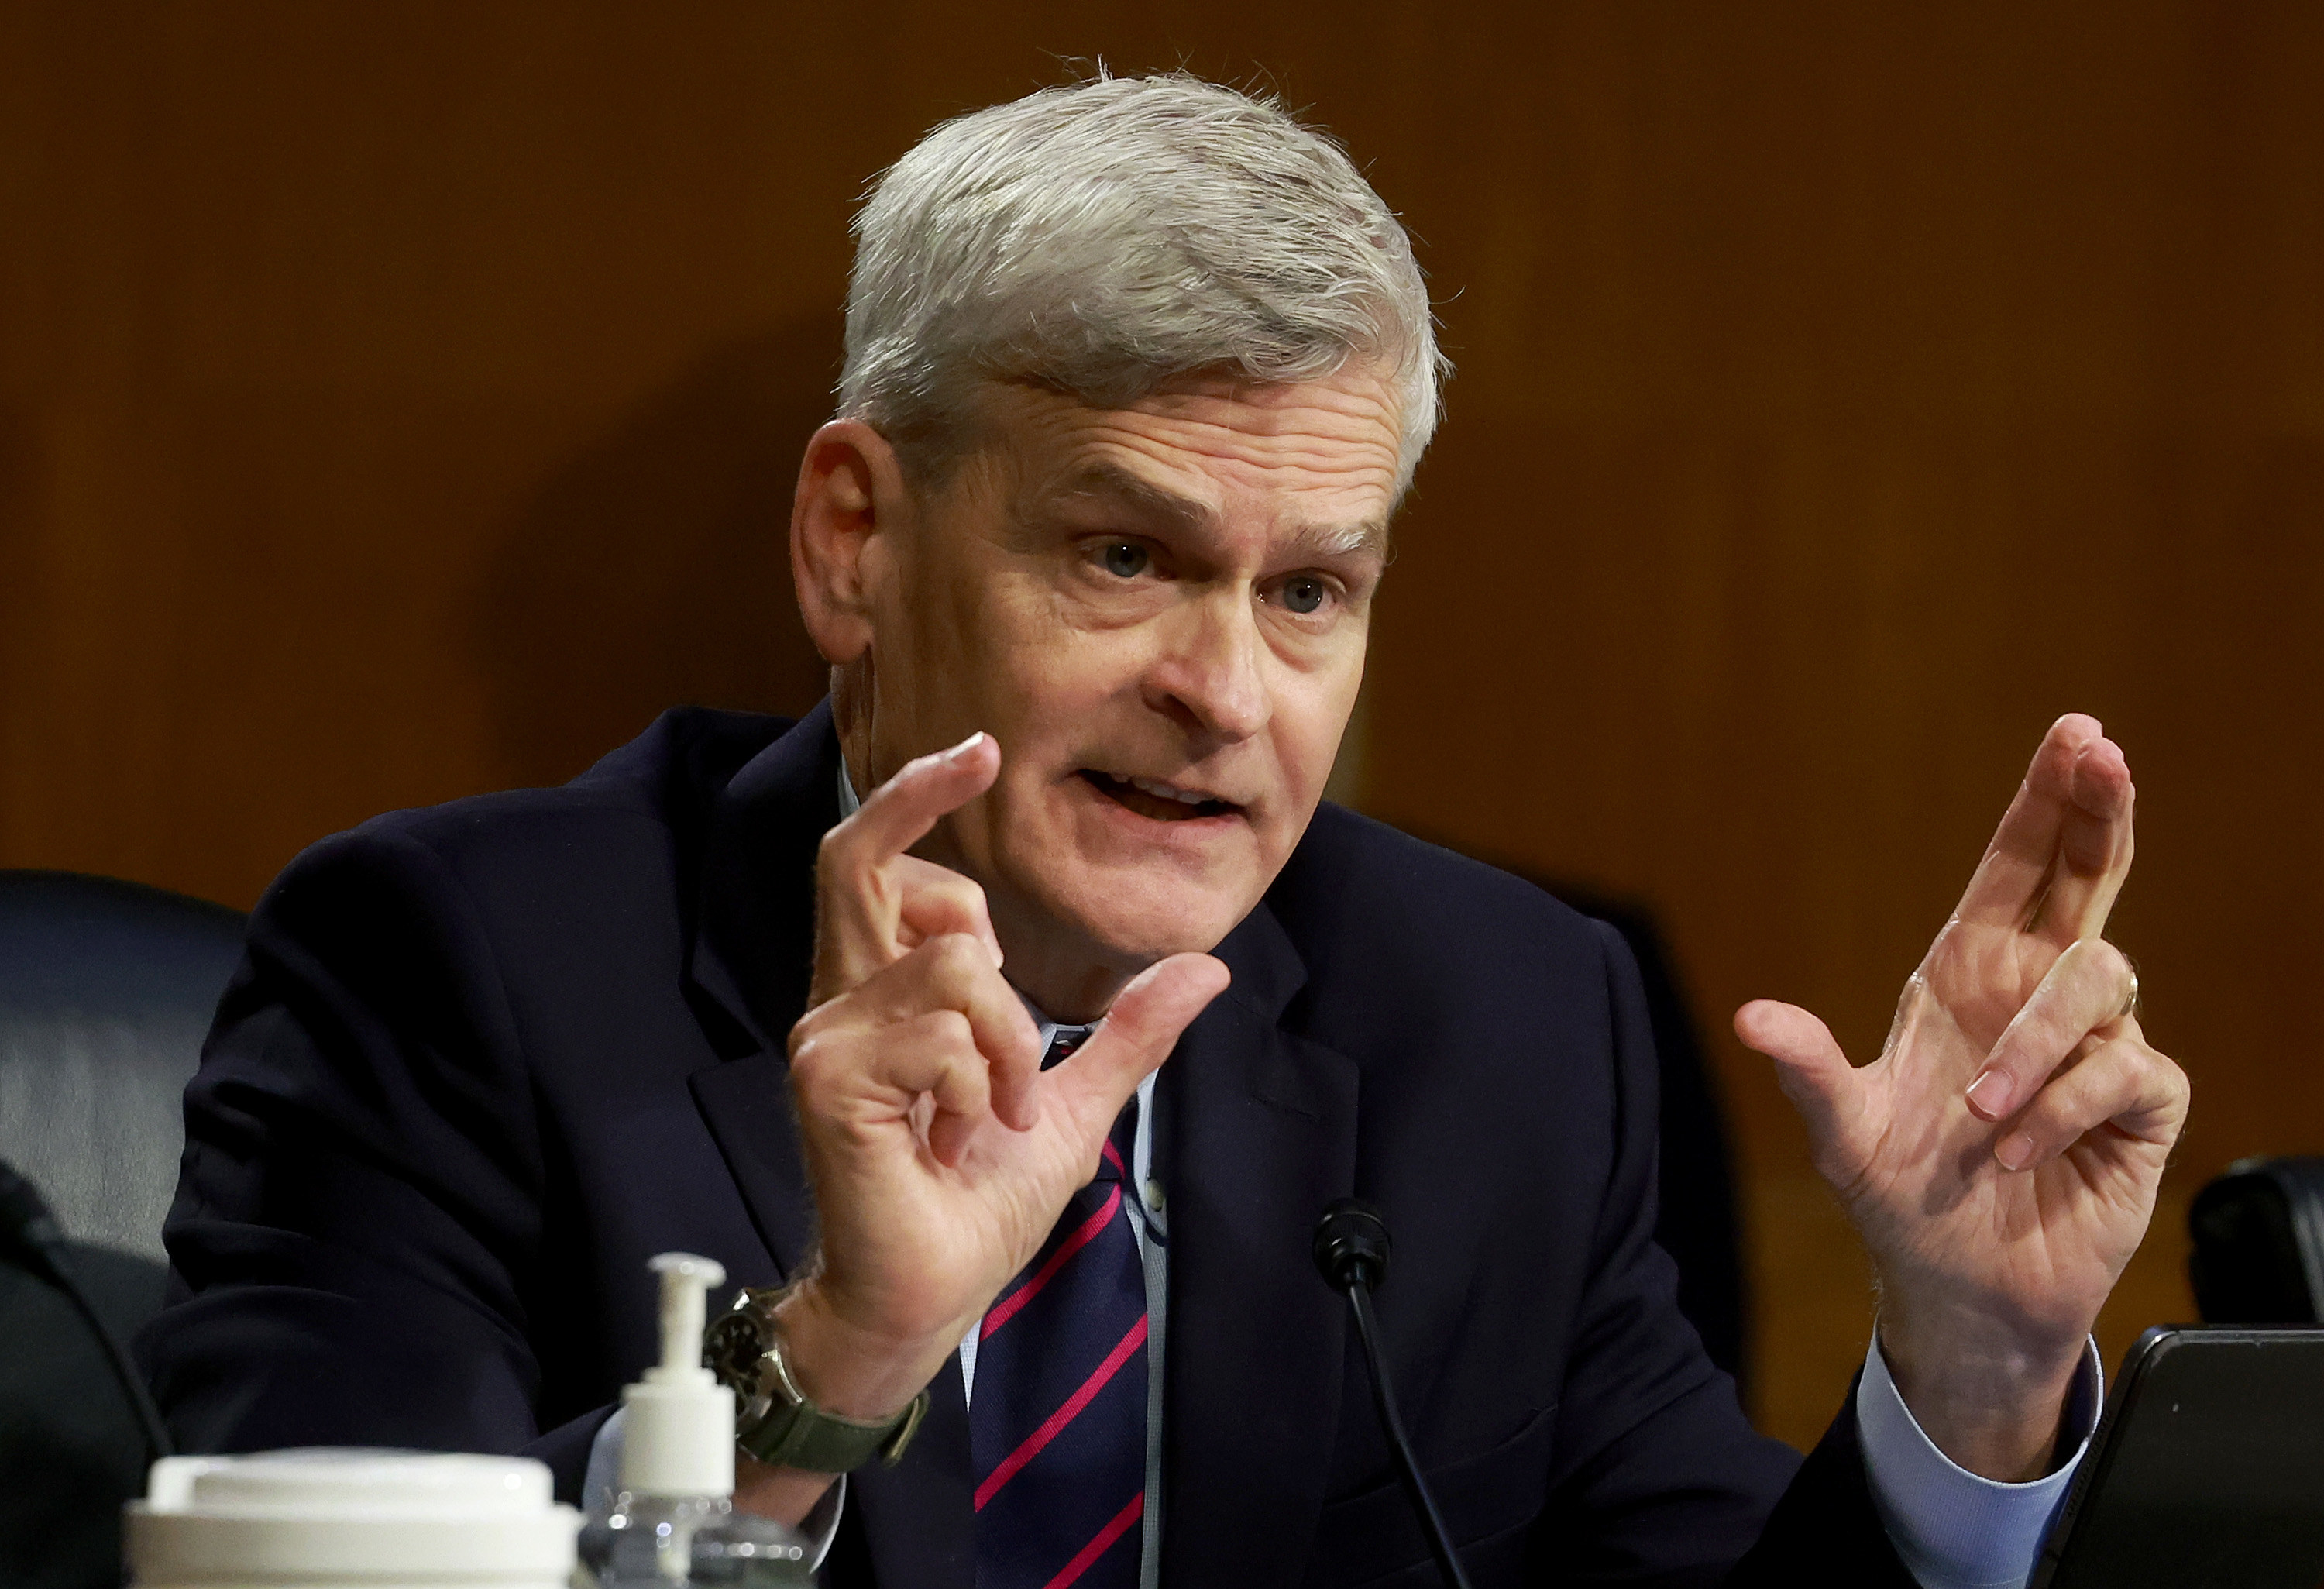 Sen. Bill Cassidy (R-LA) speaks during the COVID Federal Response Hearing on Capitol Hill